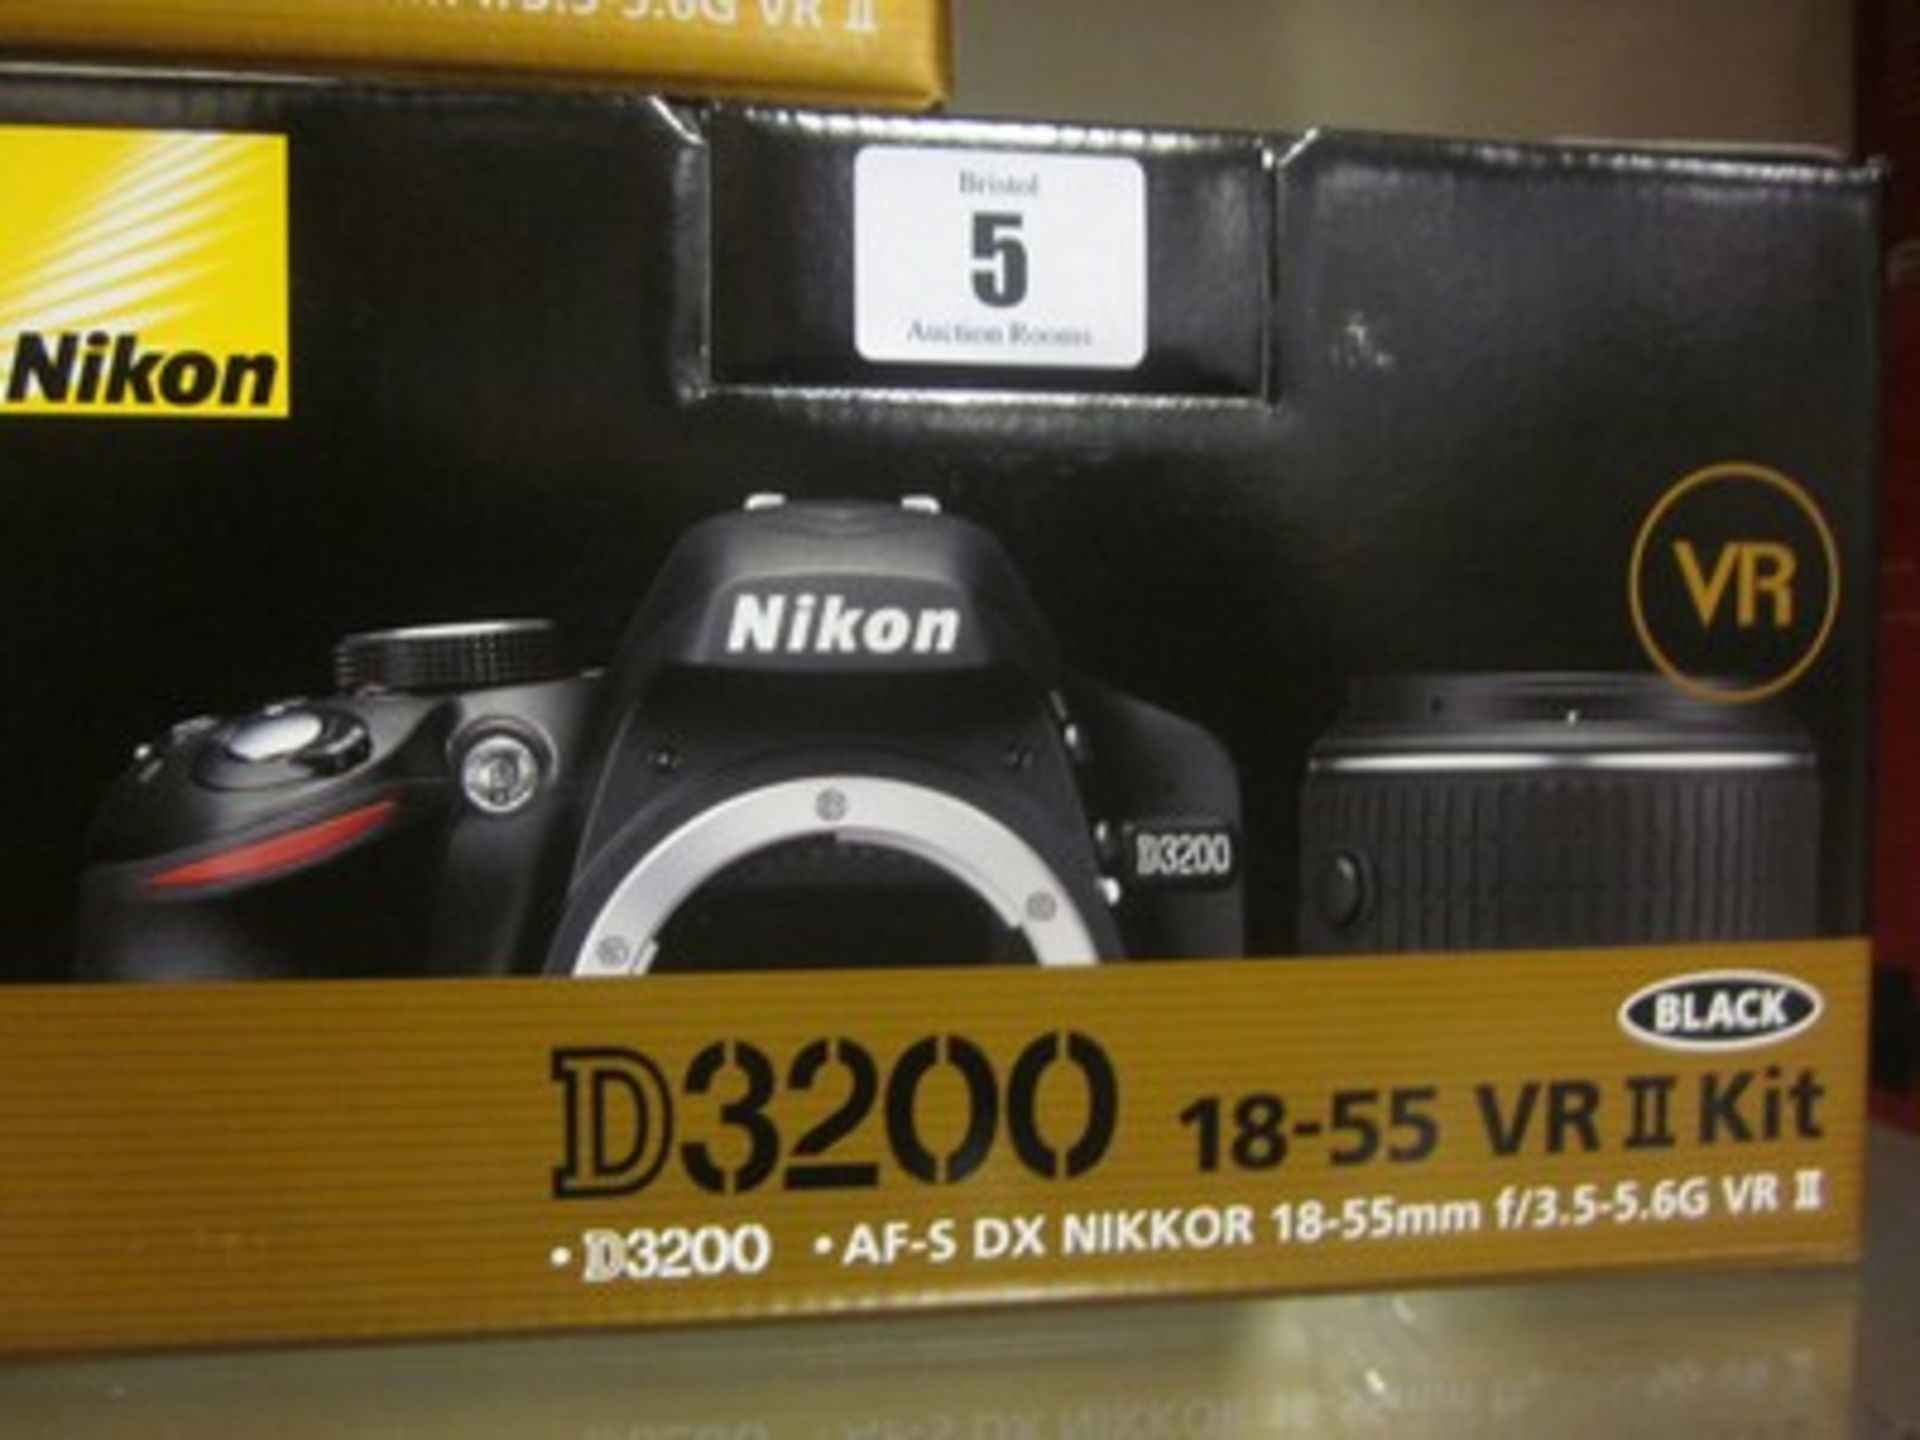 *A Nikon D3200 black AF-S DX Nikkor 18-55mm f/3.5-5.6G VR II kit (Boxed as new).Payment and